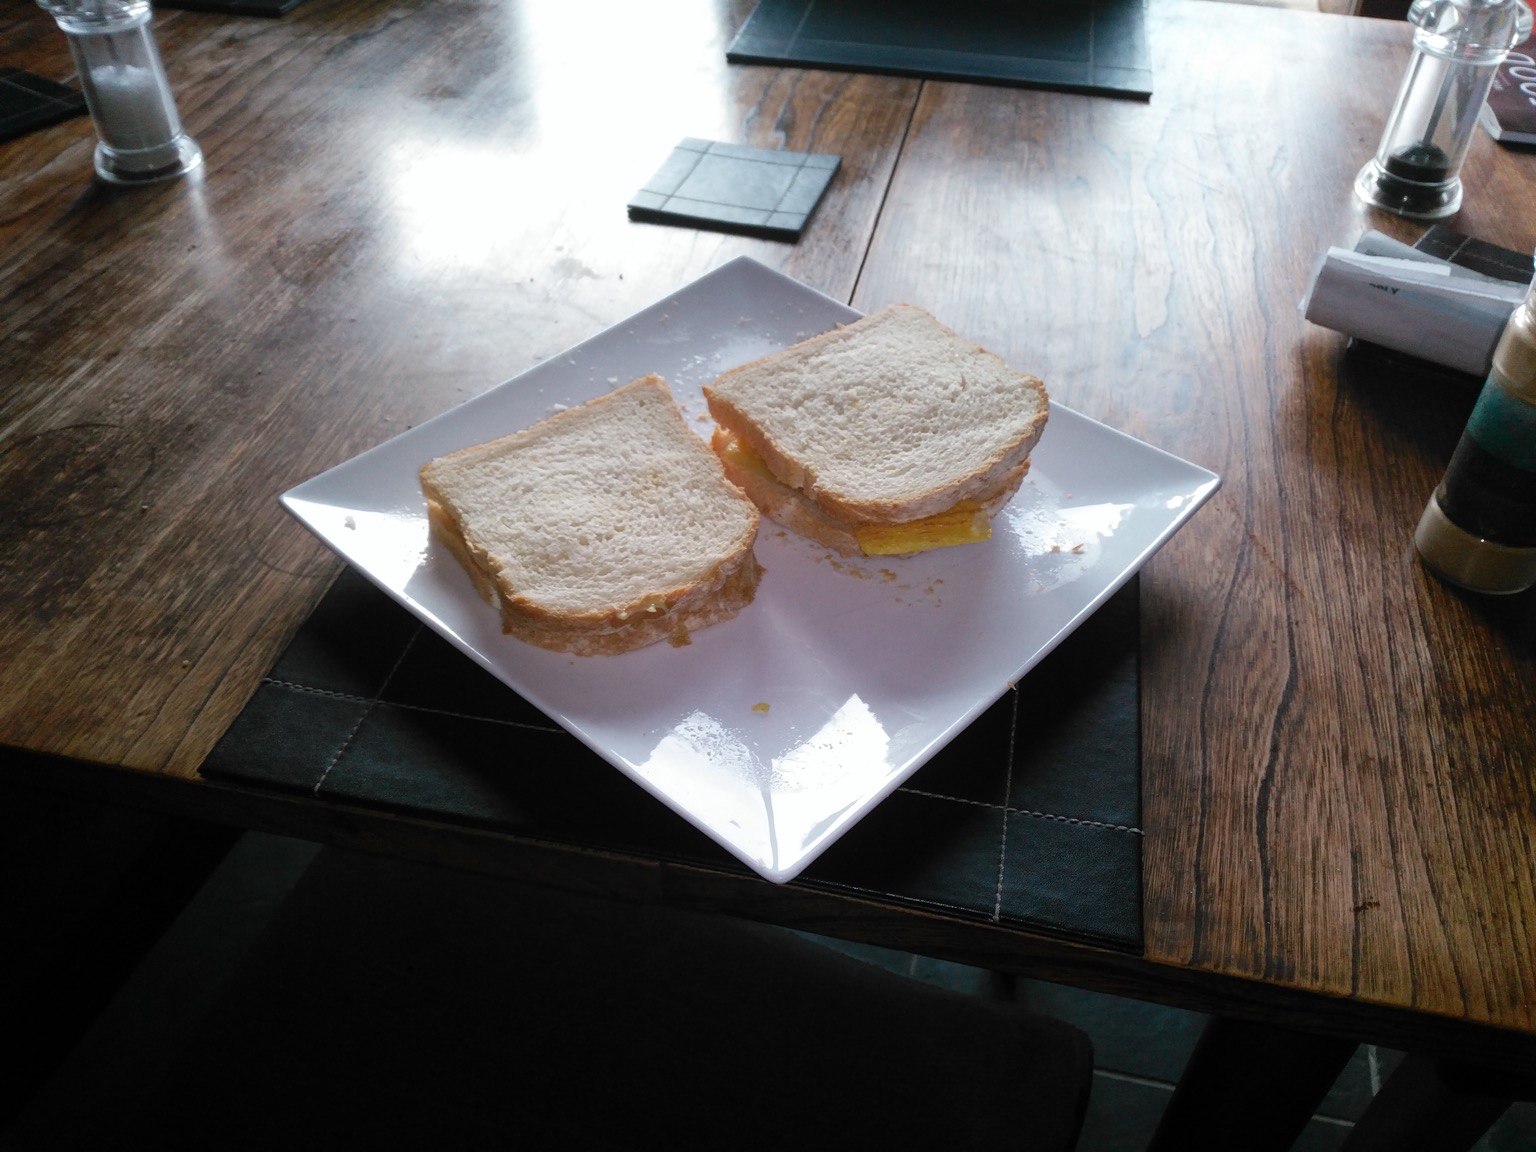 Two Frazzles sandwiches with white sliced bread